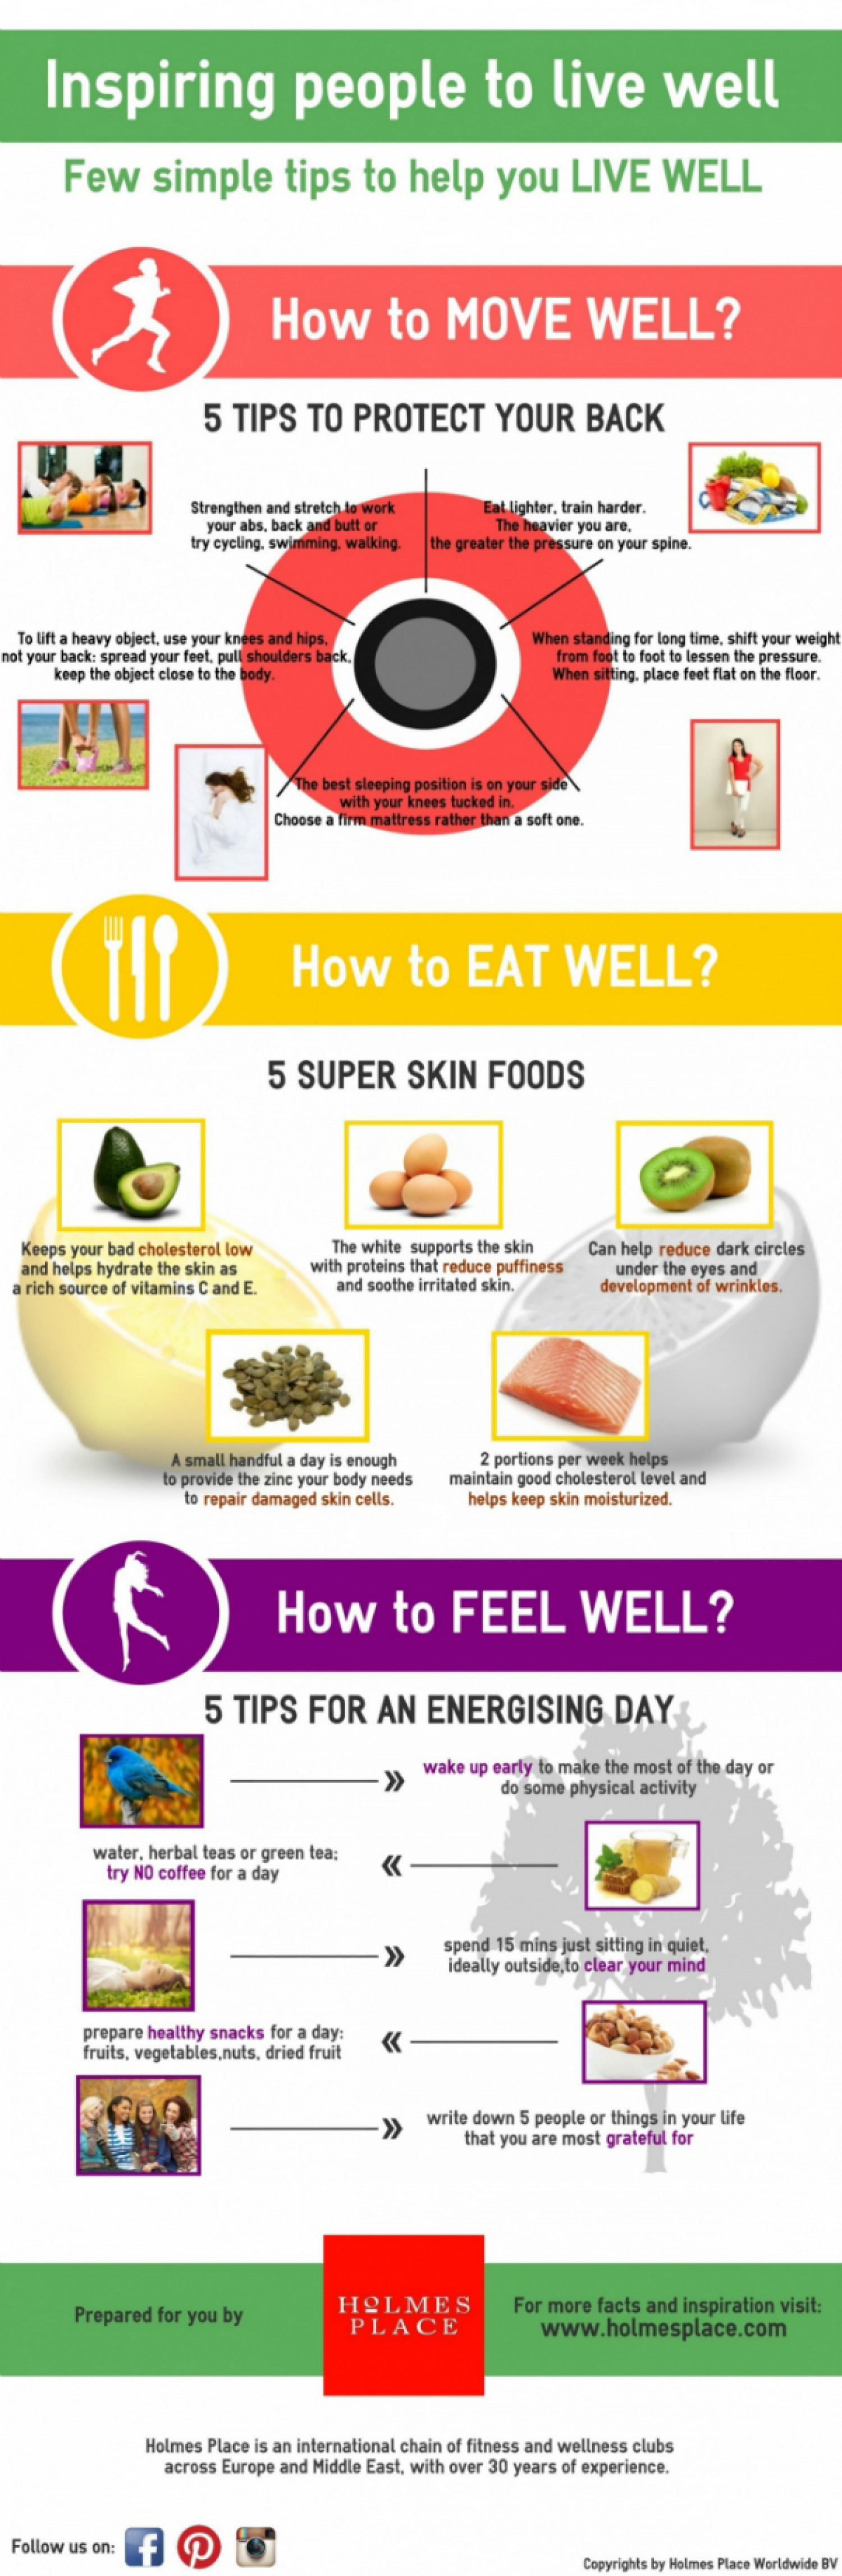 A few simple tips to live well Infographic